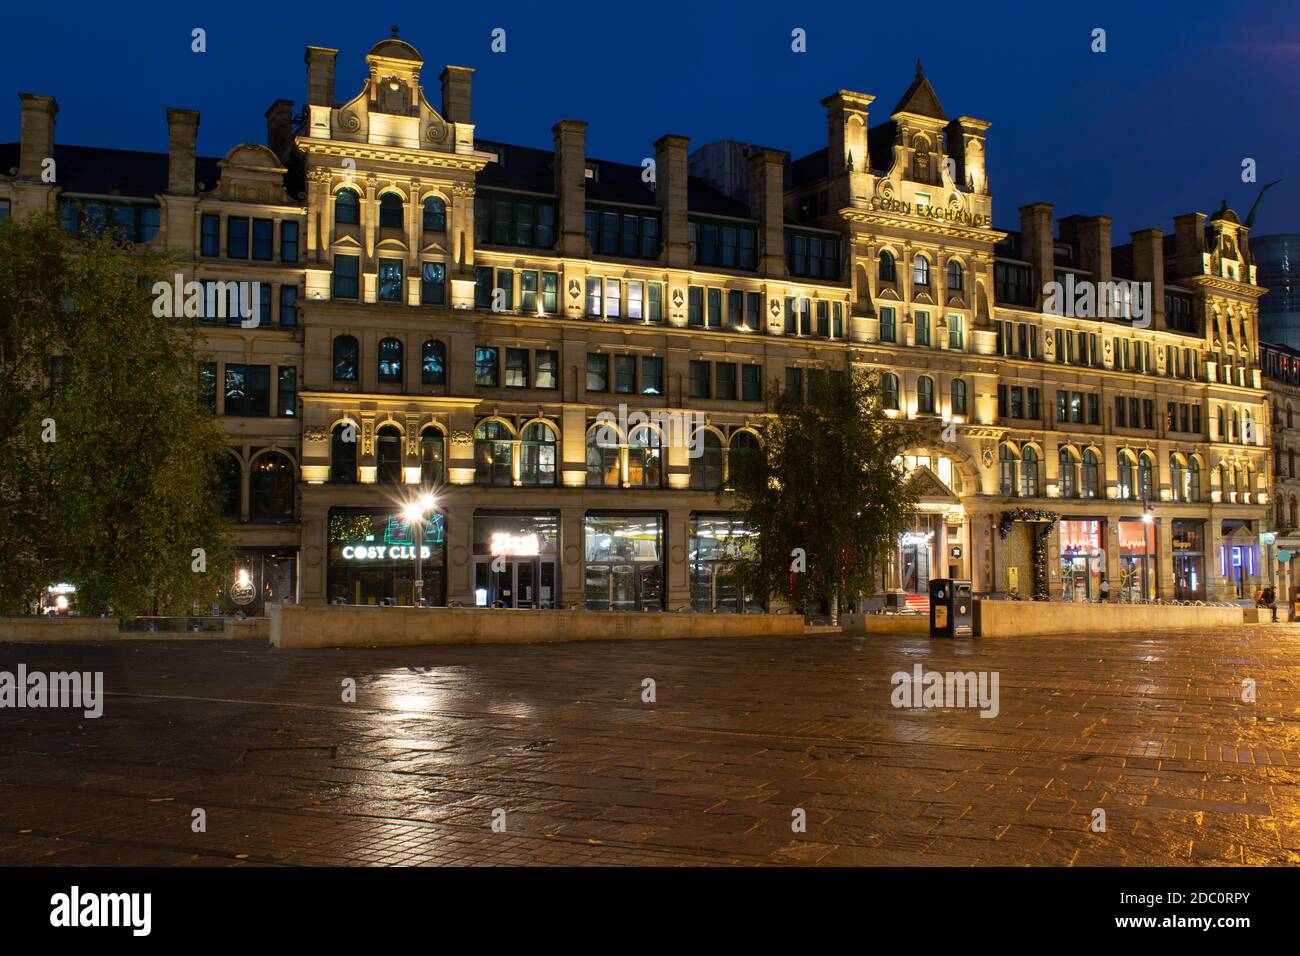 Corn Exchange building at twilight, Exchange Square, Manchester, UK. Empty streets during the November lockdown. Stock Photo